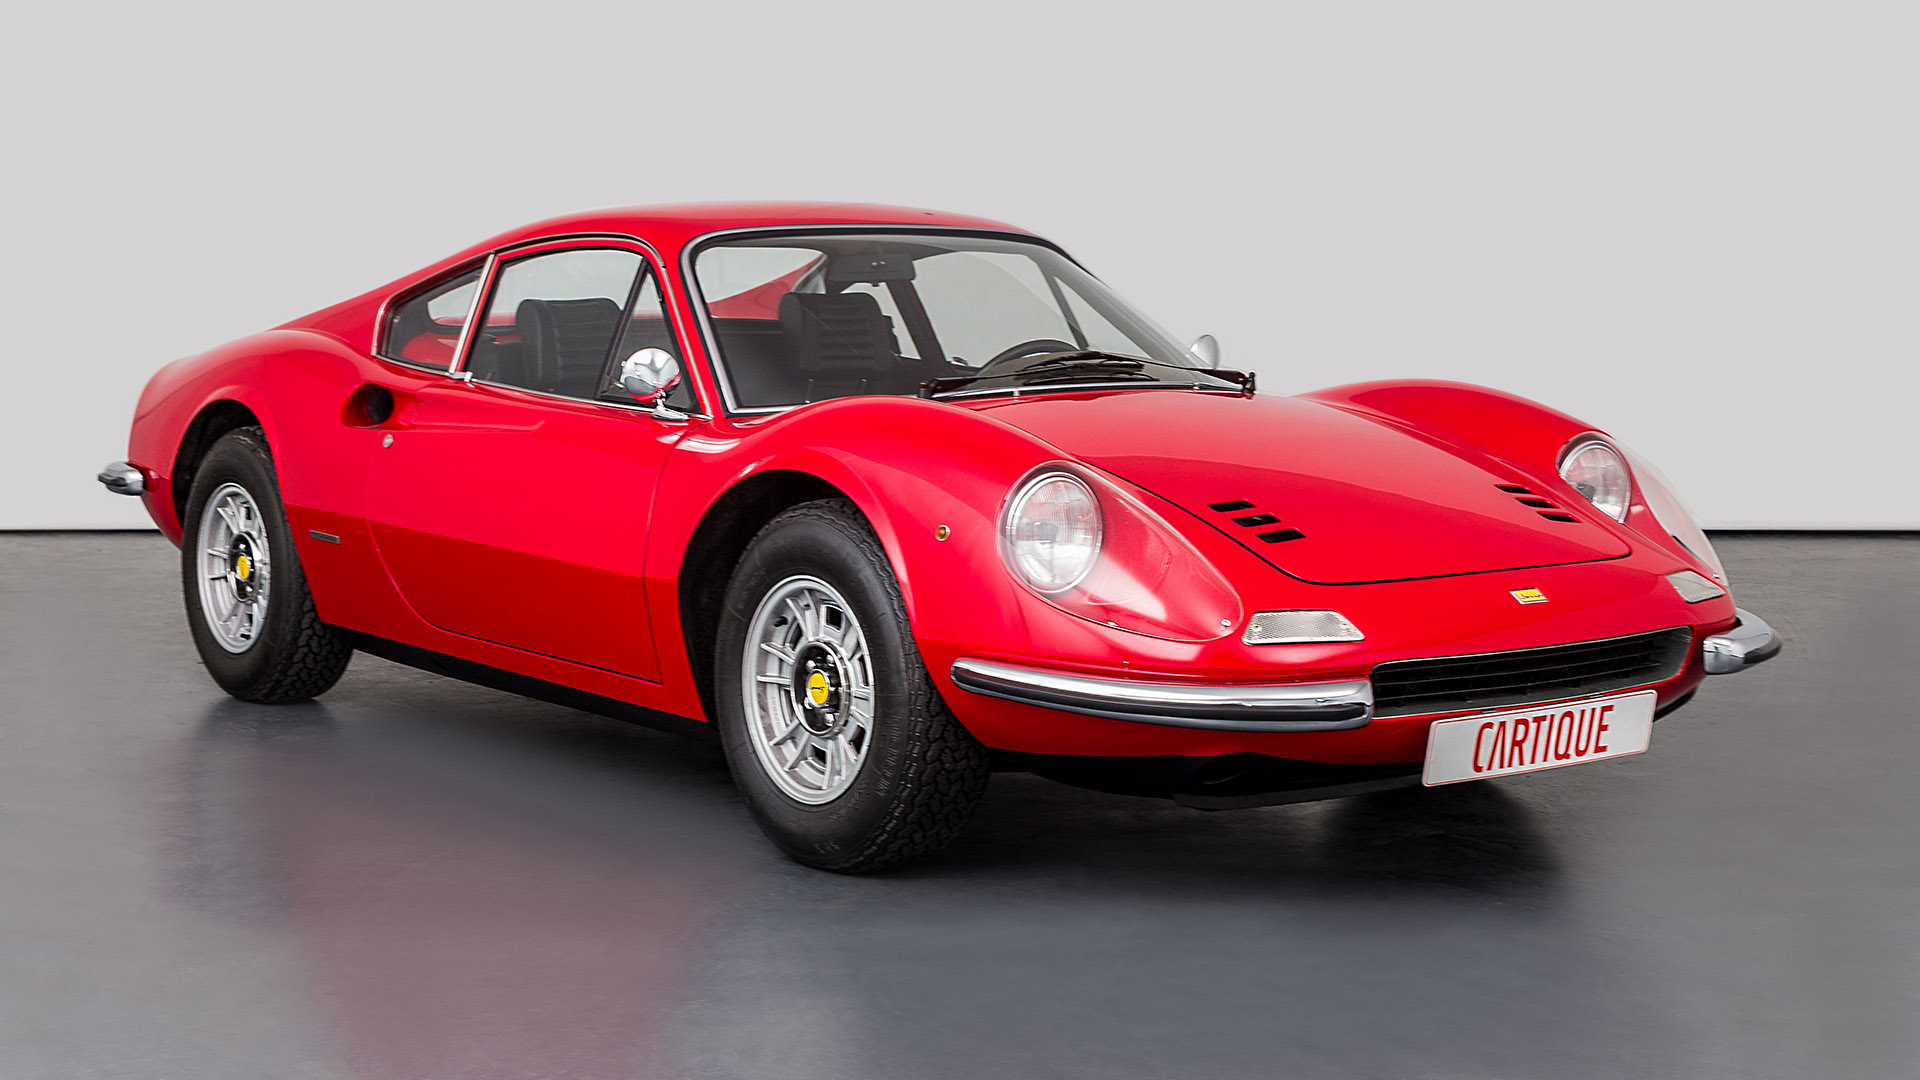 Front-angled view of a red Ferrari Dino 246 GT